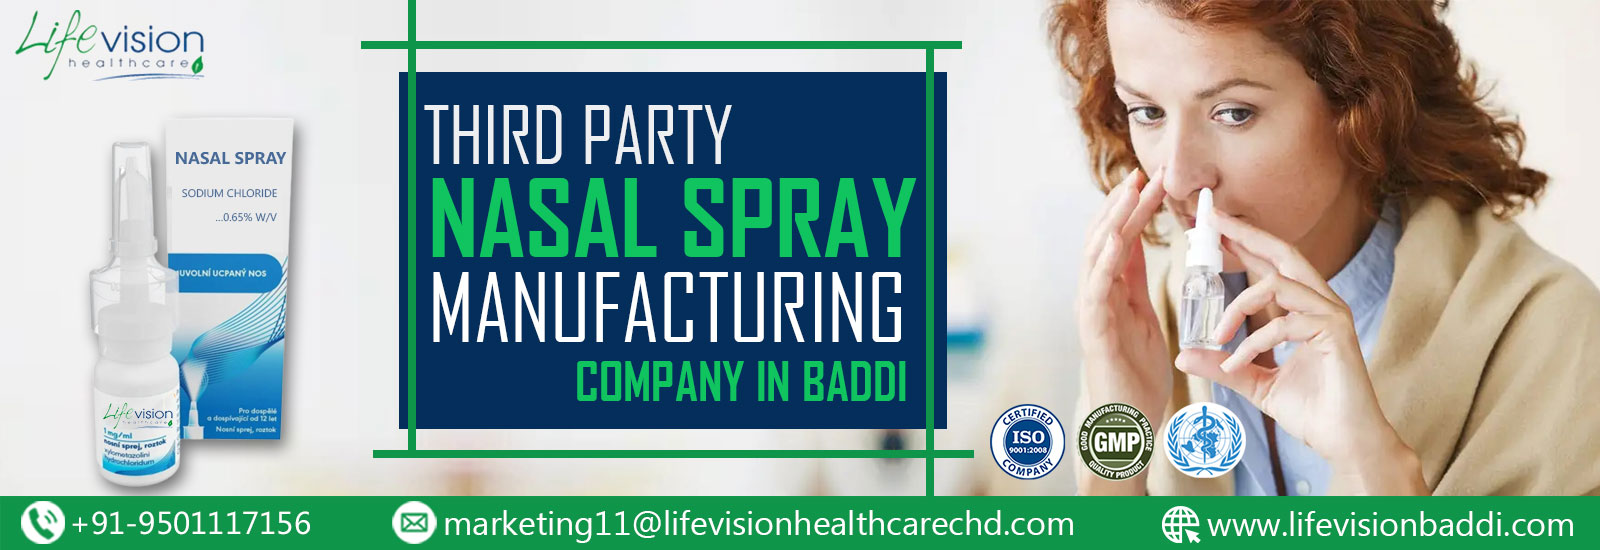 Reliable #1 Third Party Nasal Spray Manufacturer in Baddi